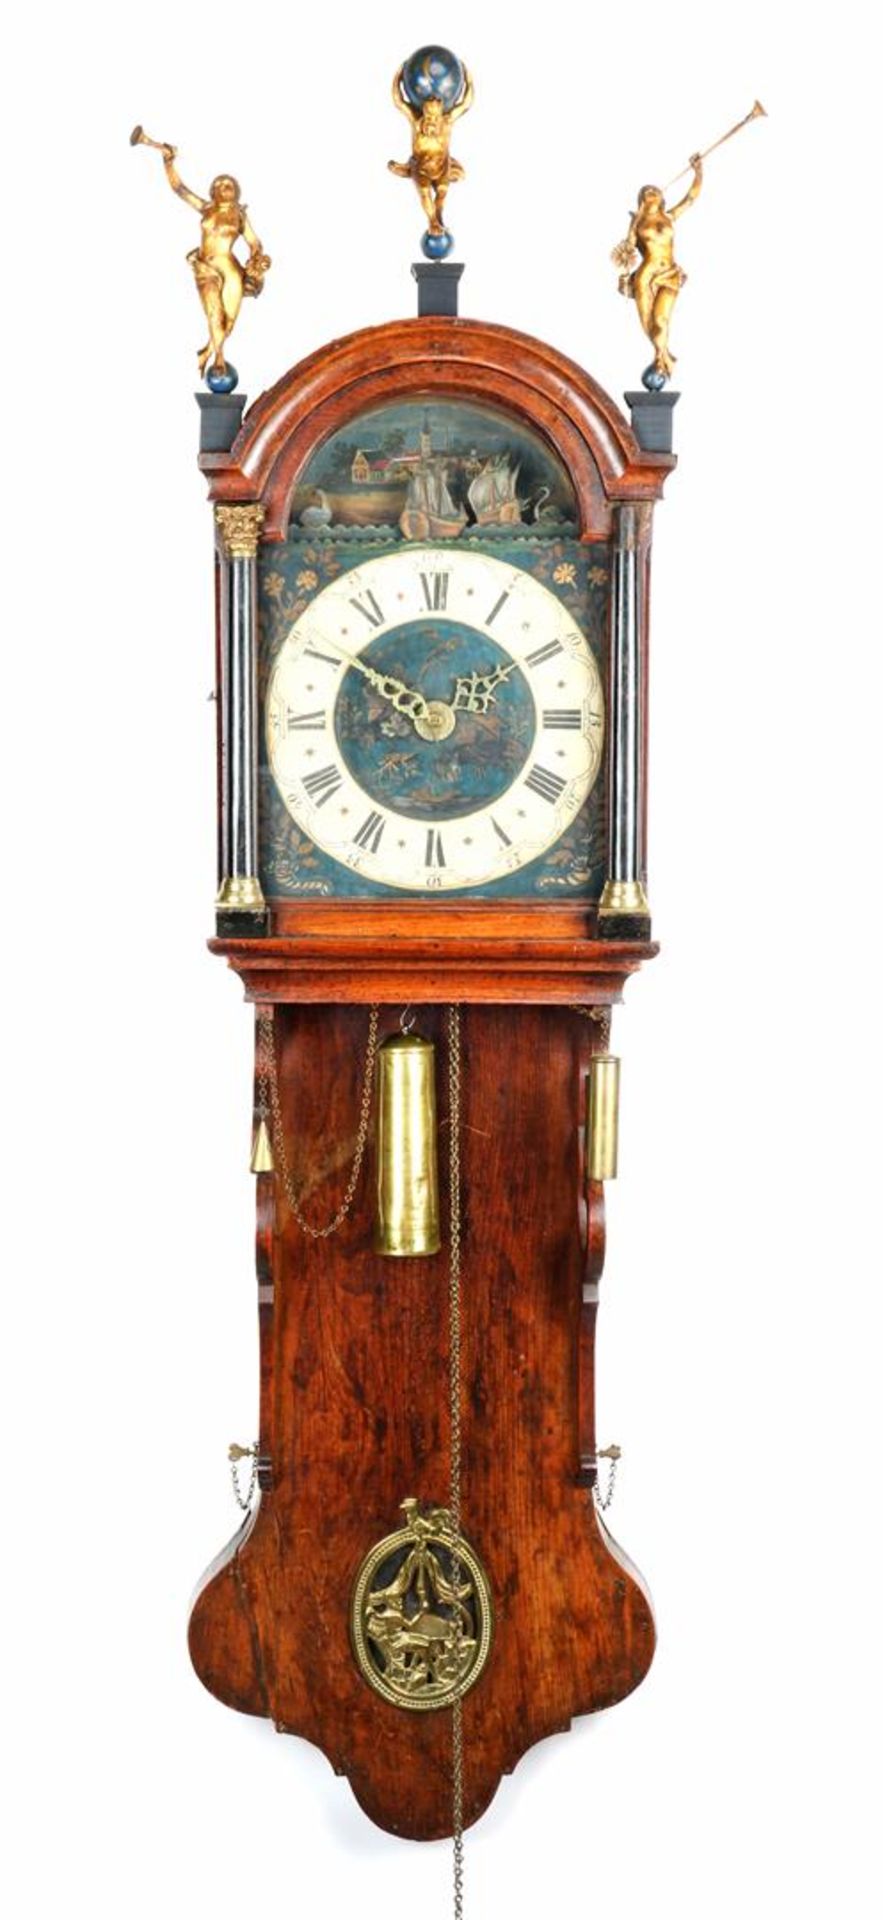 Frisian tail clock with painted dial and ship mechanism